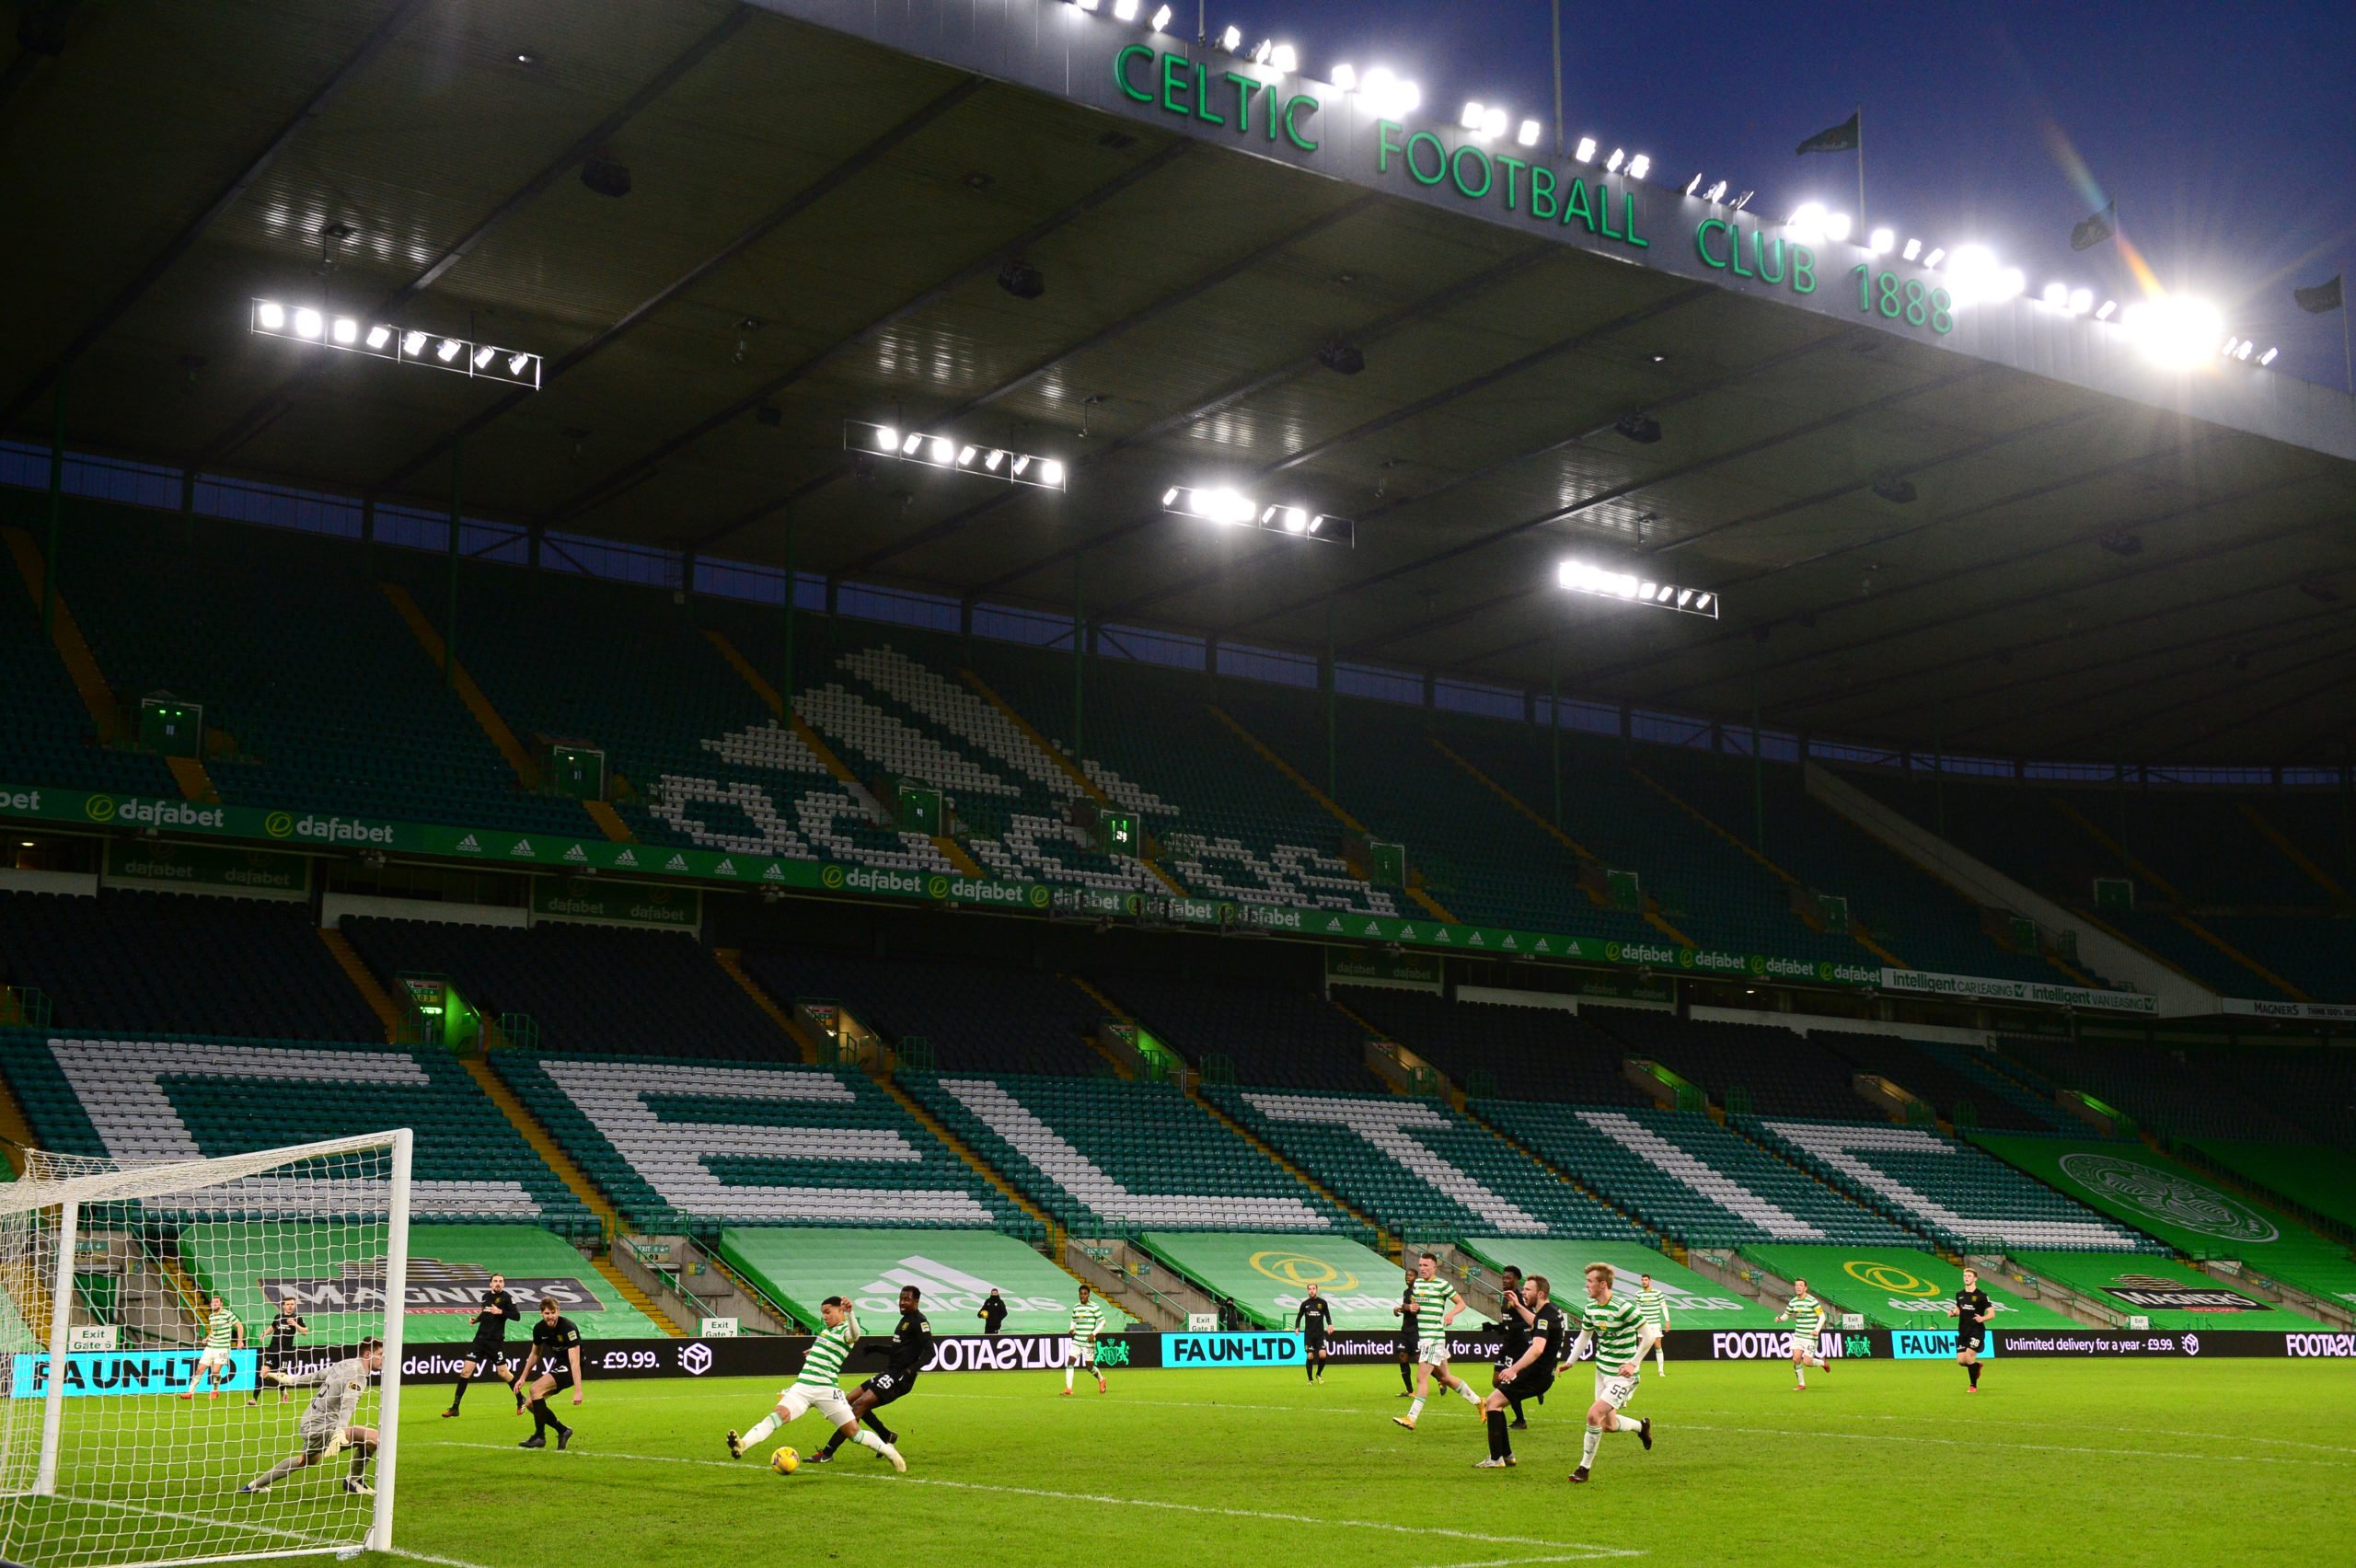 Celtic View temporarily closed as Covid-19 affects in-house press